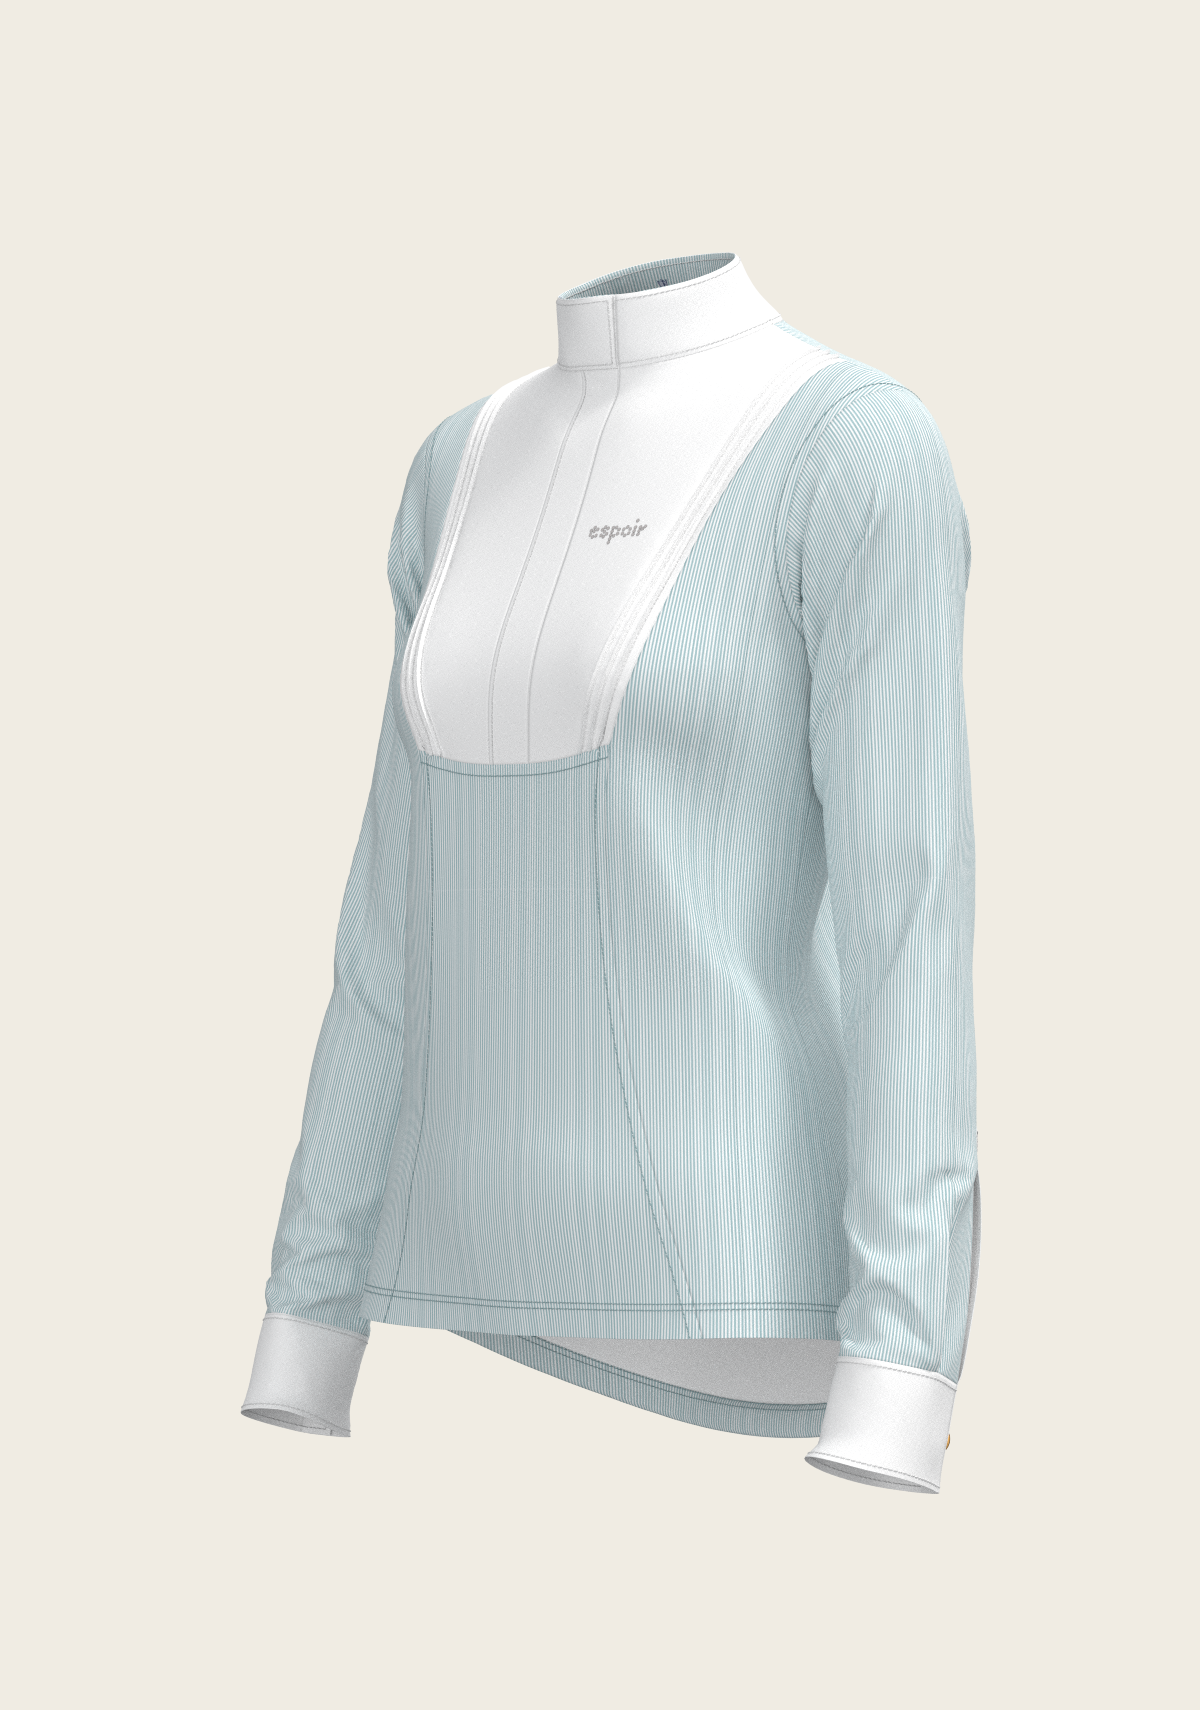  Stripes in Sky Blue Short Pleated Long Sleeve Show Shirt